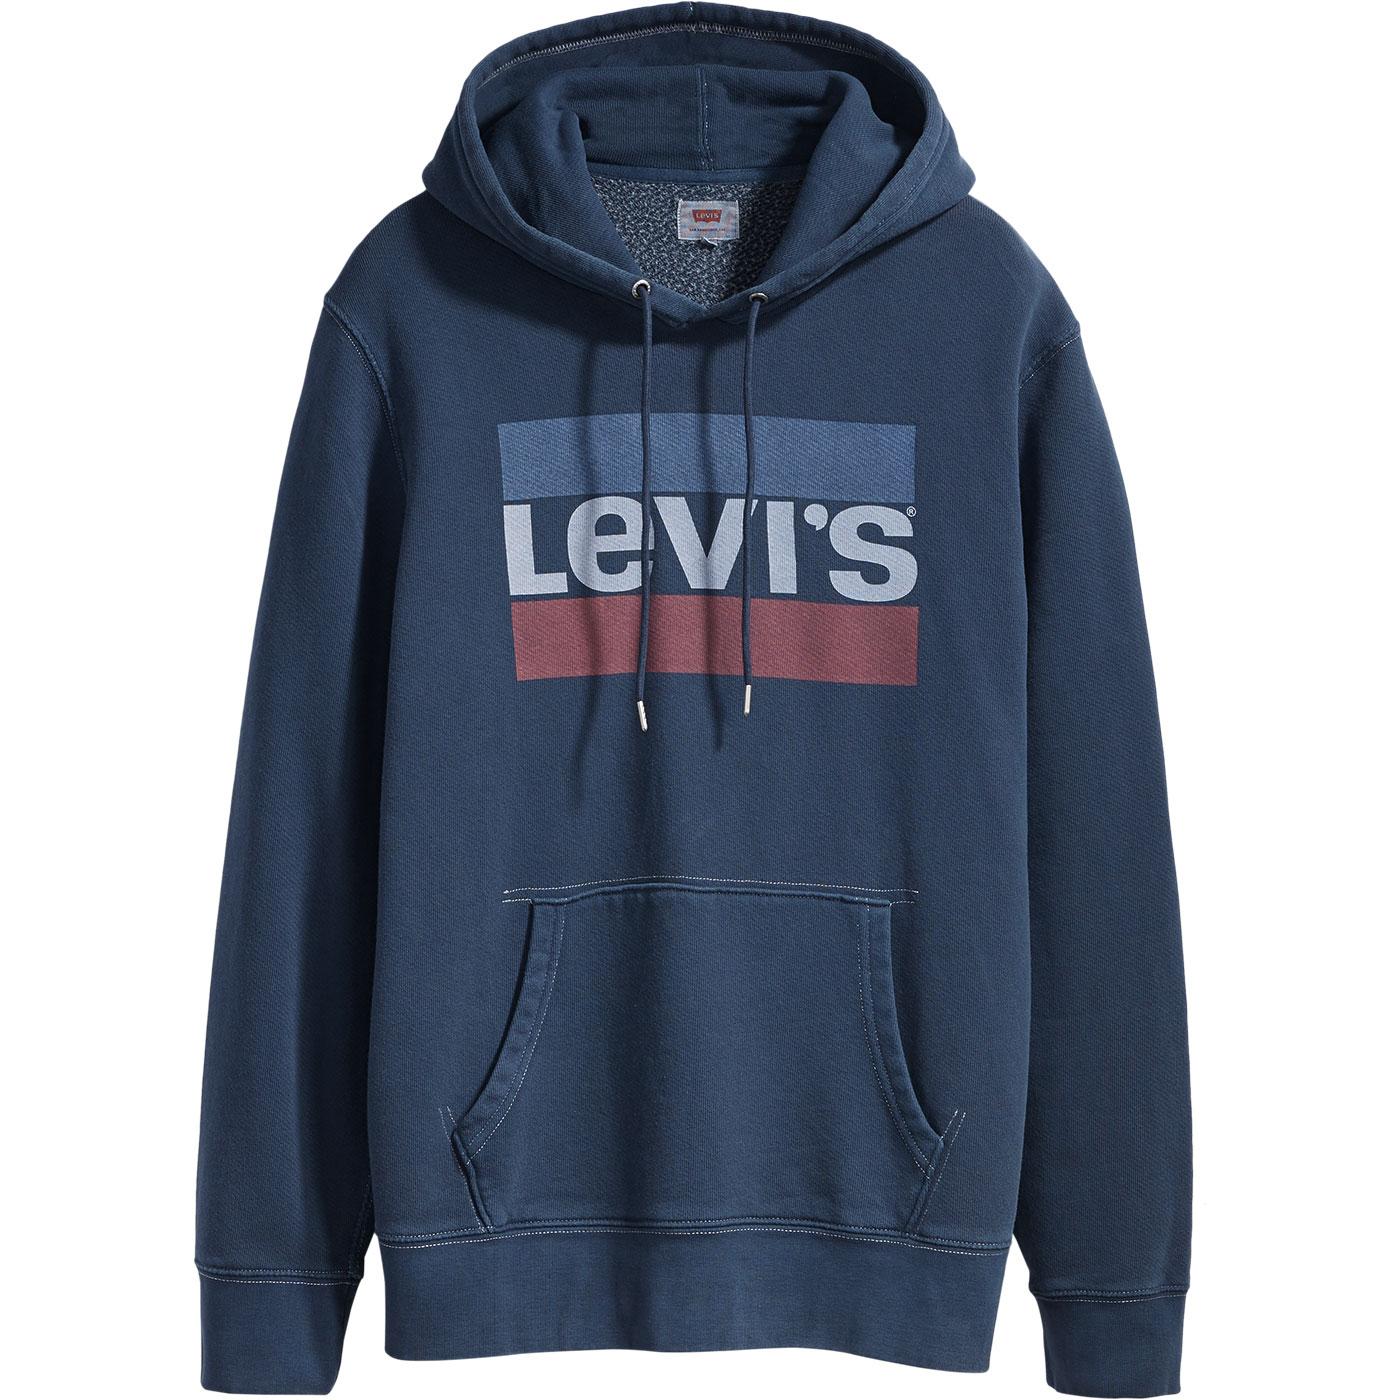 levi's hoodie with sports vintage logo